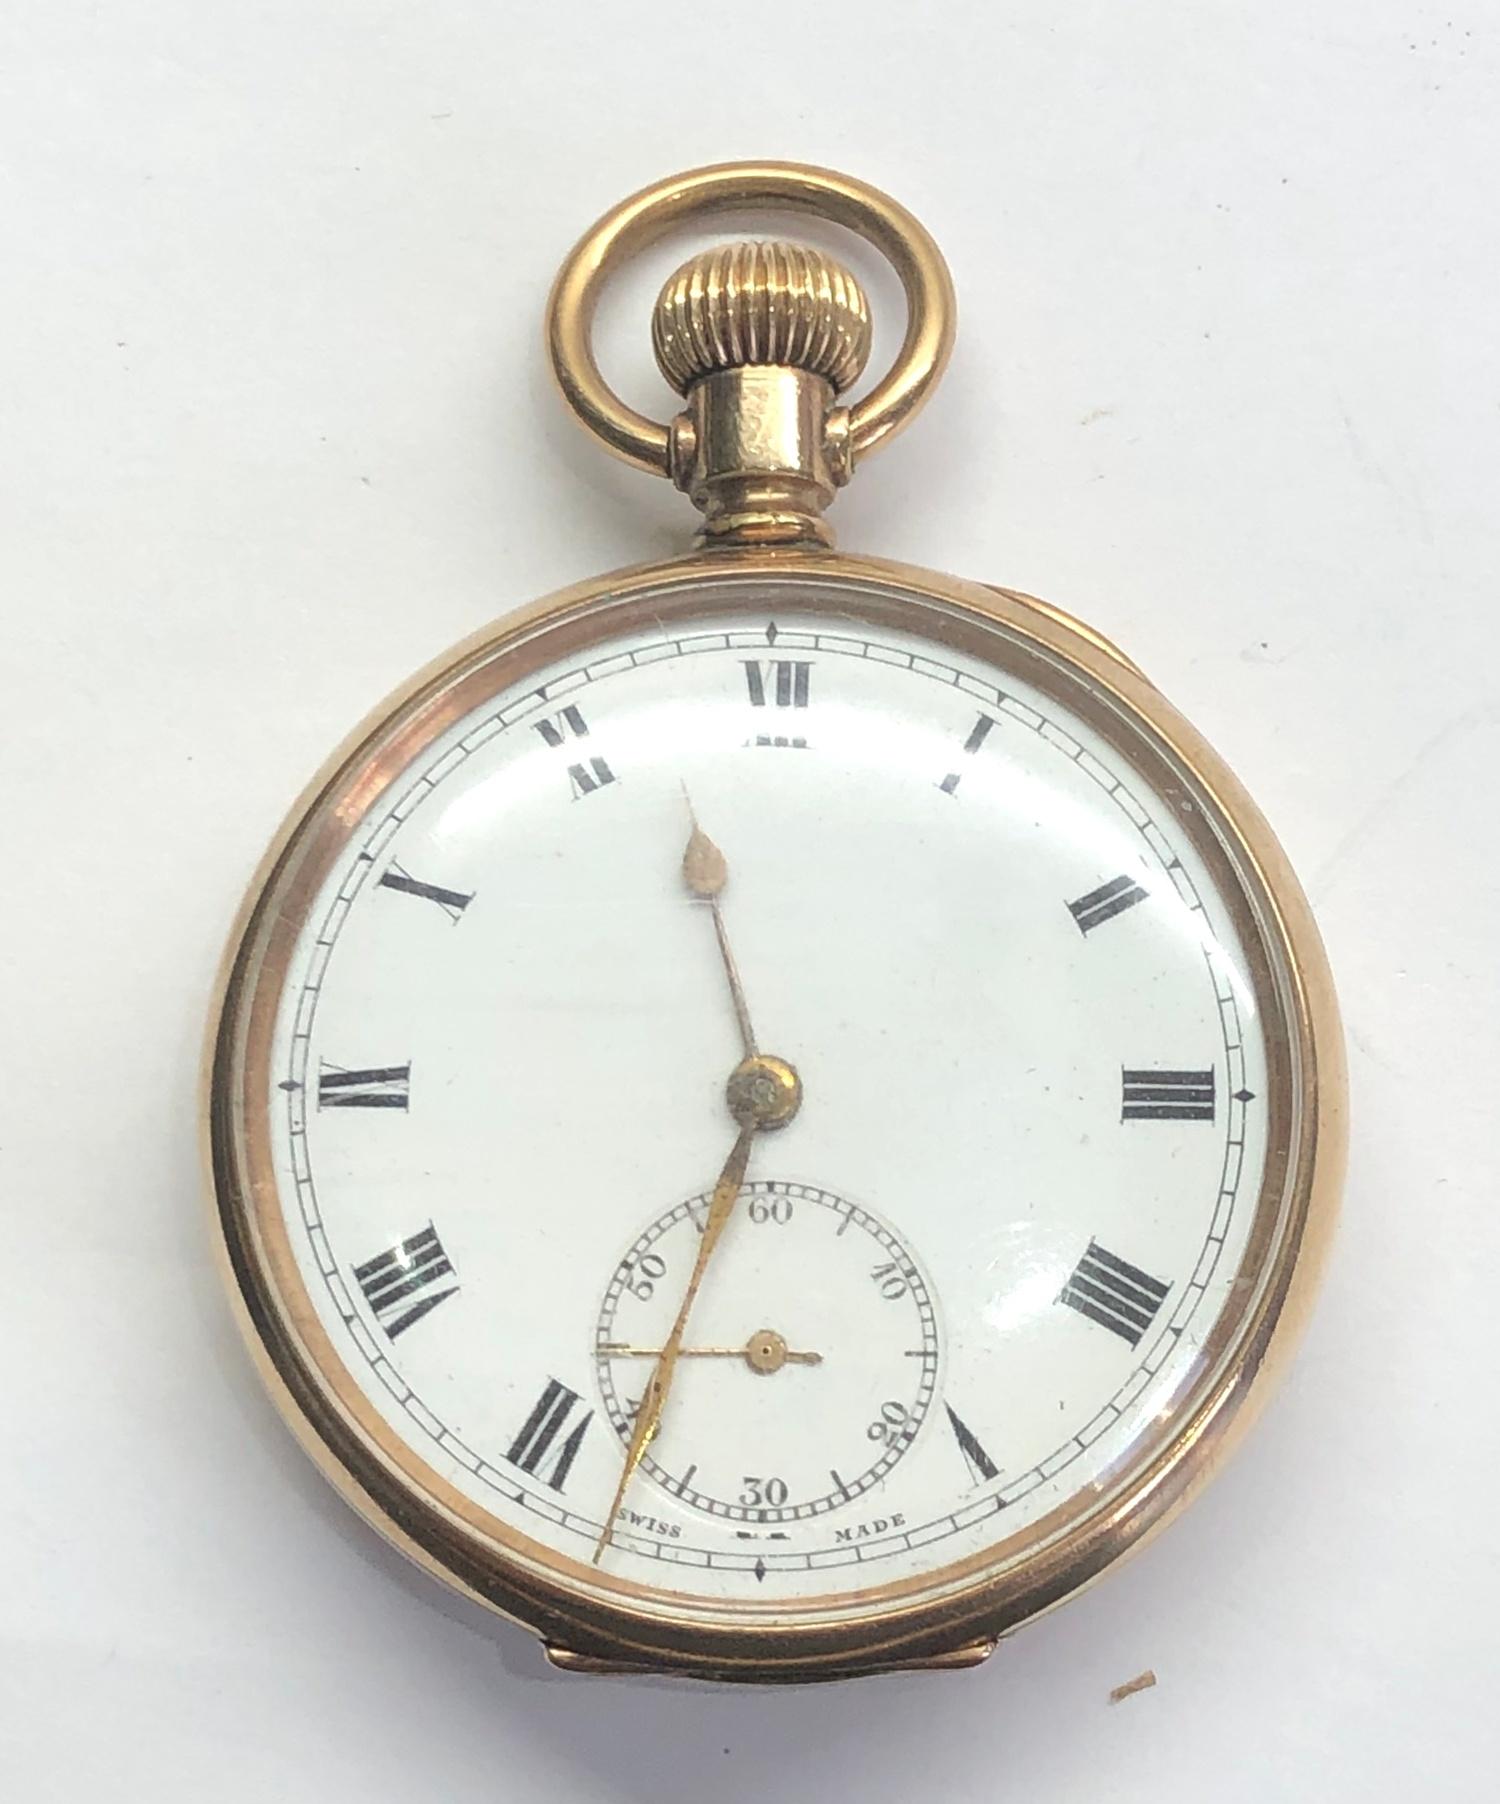 Bulla gold plated open face pocket watch